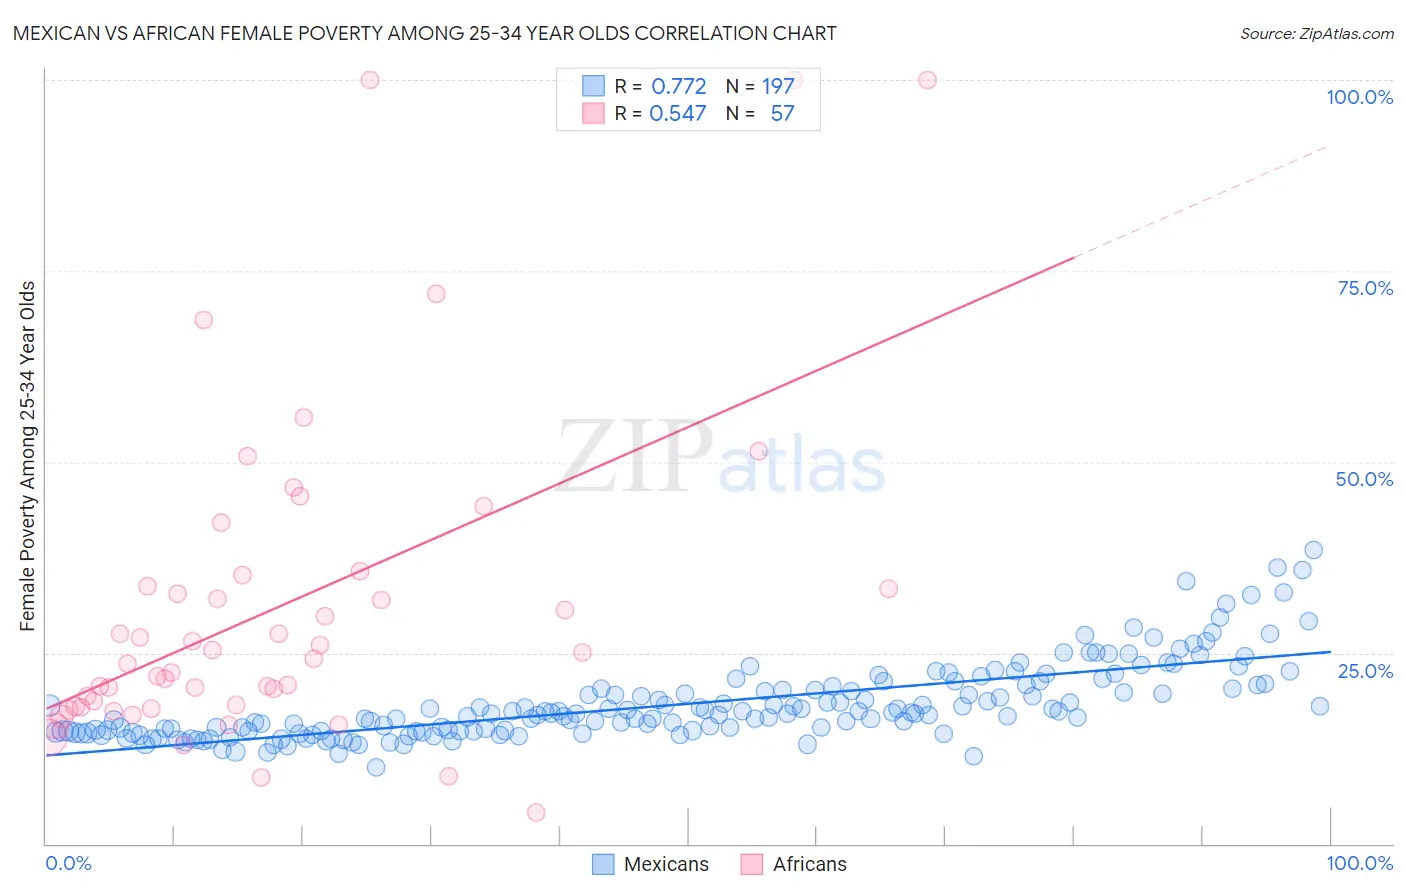 Mexican vs African Female Poverty Among 25-34 Year Olds